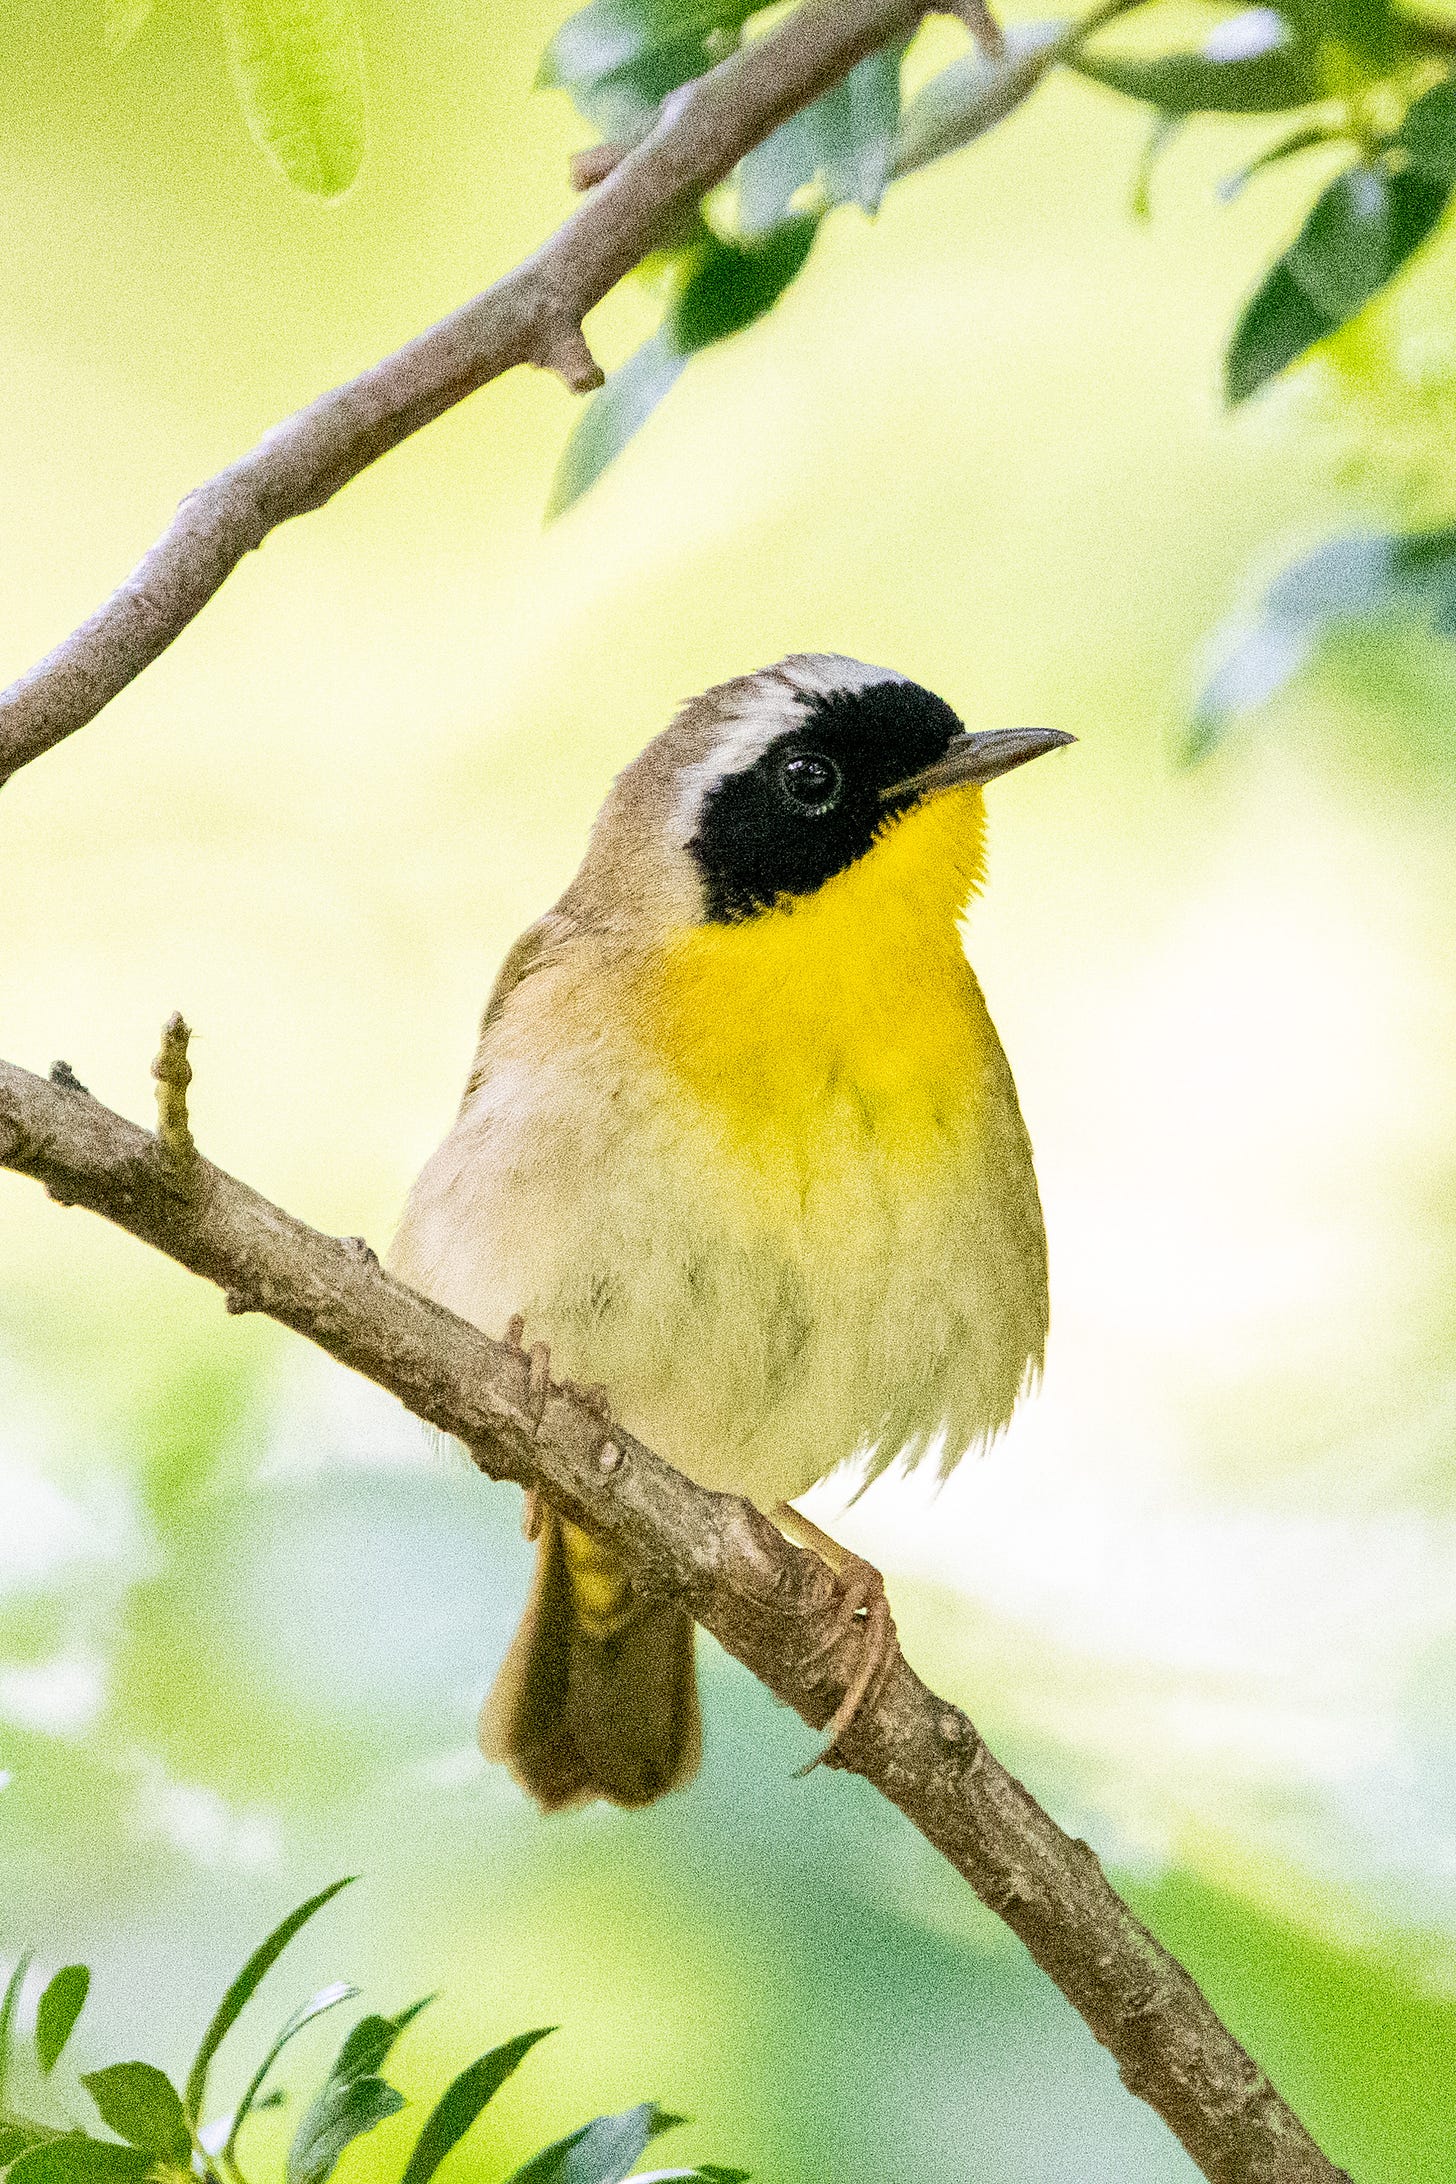 A close-up photo of a male common yellowthroat, perched on a bare branch against a chartreuse background